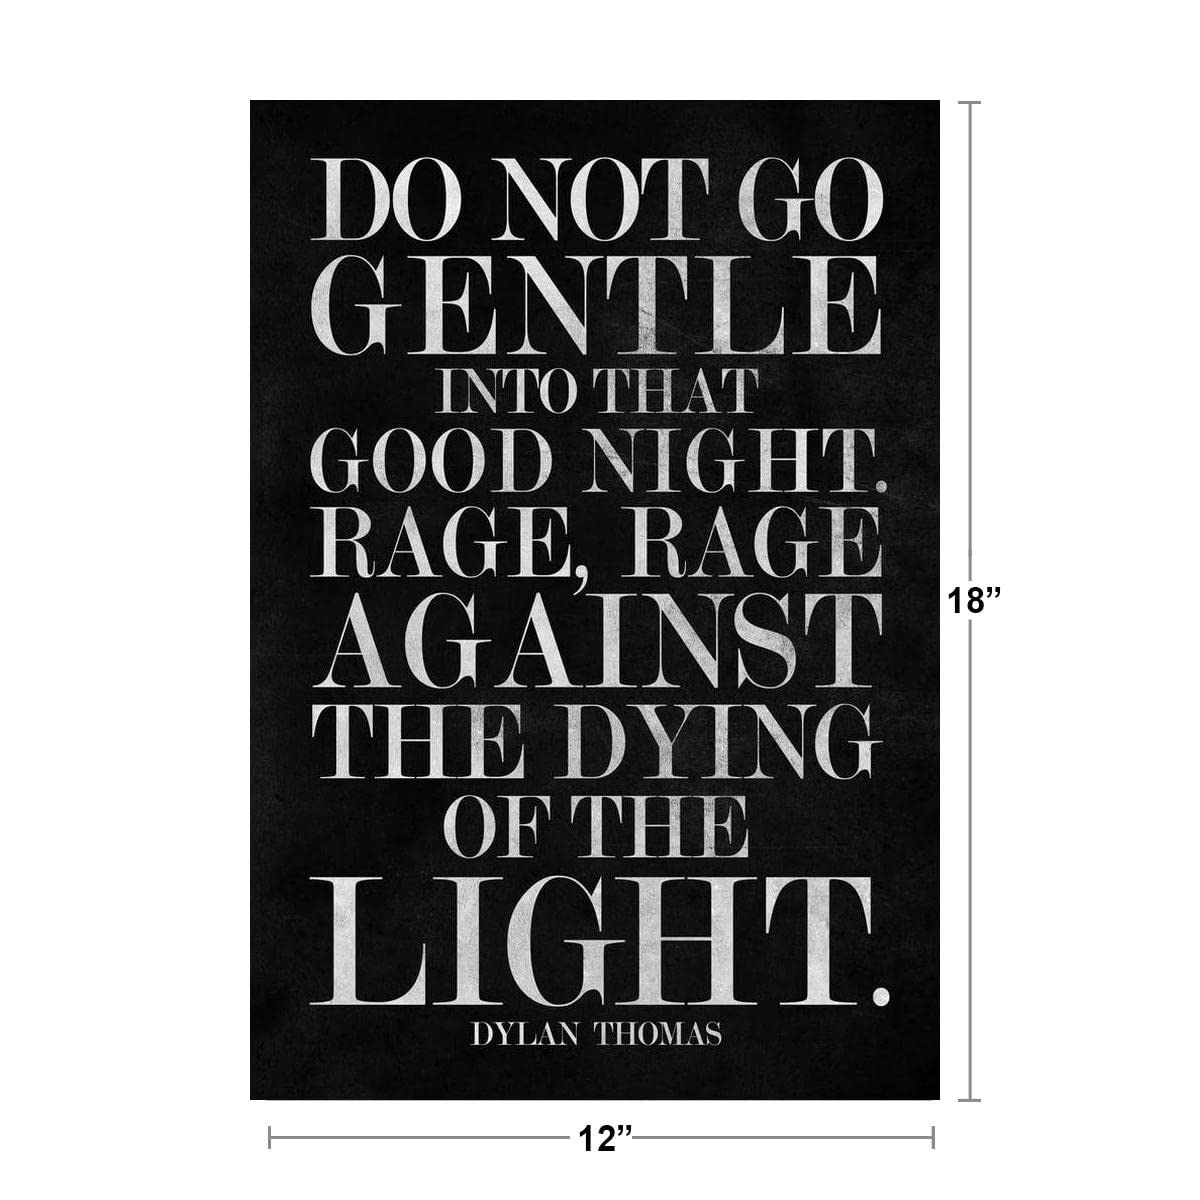 Dylan Thomas Do Not Go Gentle Into That Good Night Famous Motivational Inspirational Quote Black White Quote Teamwork Inspire Quotation Gratitude Sign Cool Wall Decor Art Print Poster 12x18